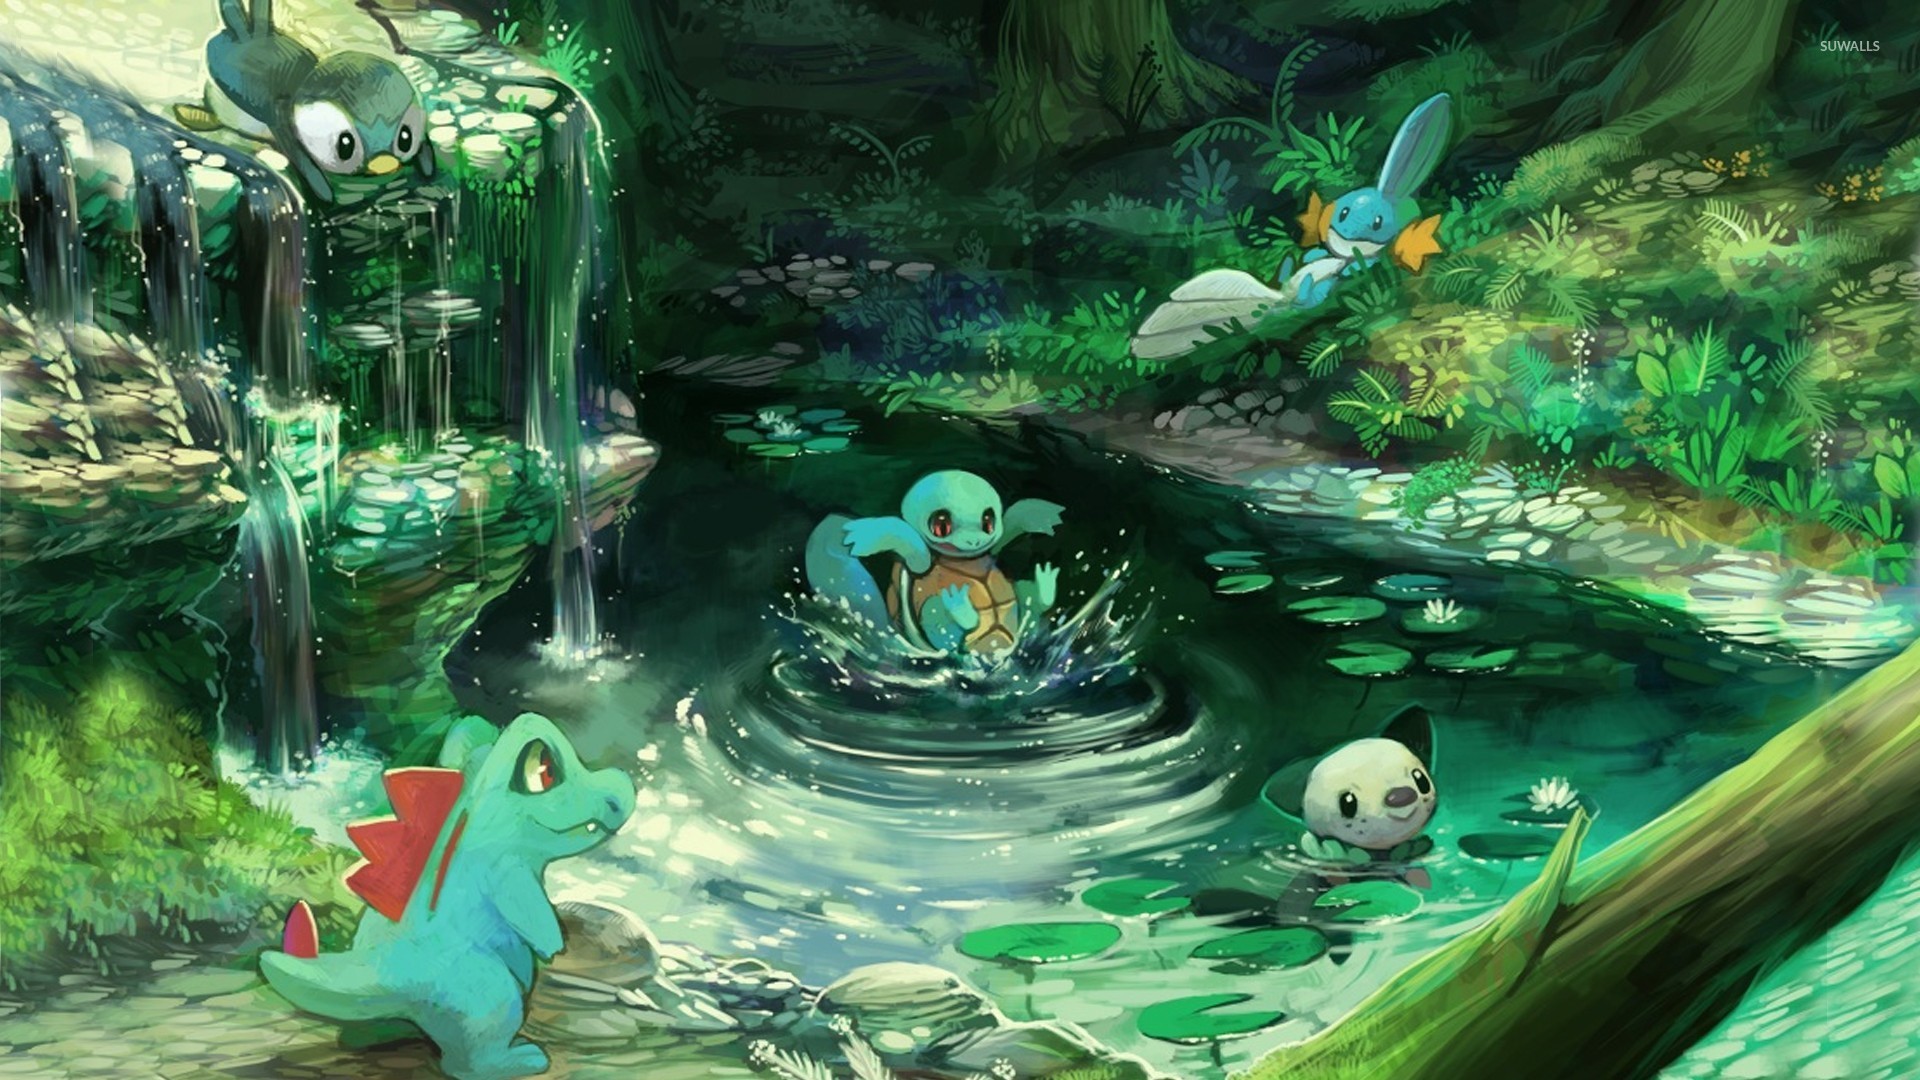 Pokemon characters in the forest wallpaper - Game wallpapers - #52063